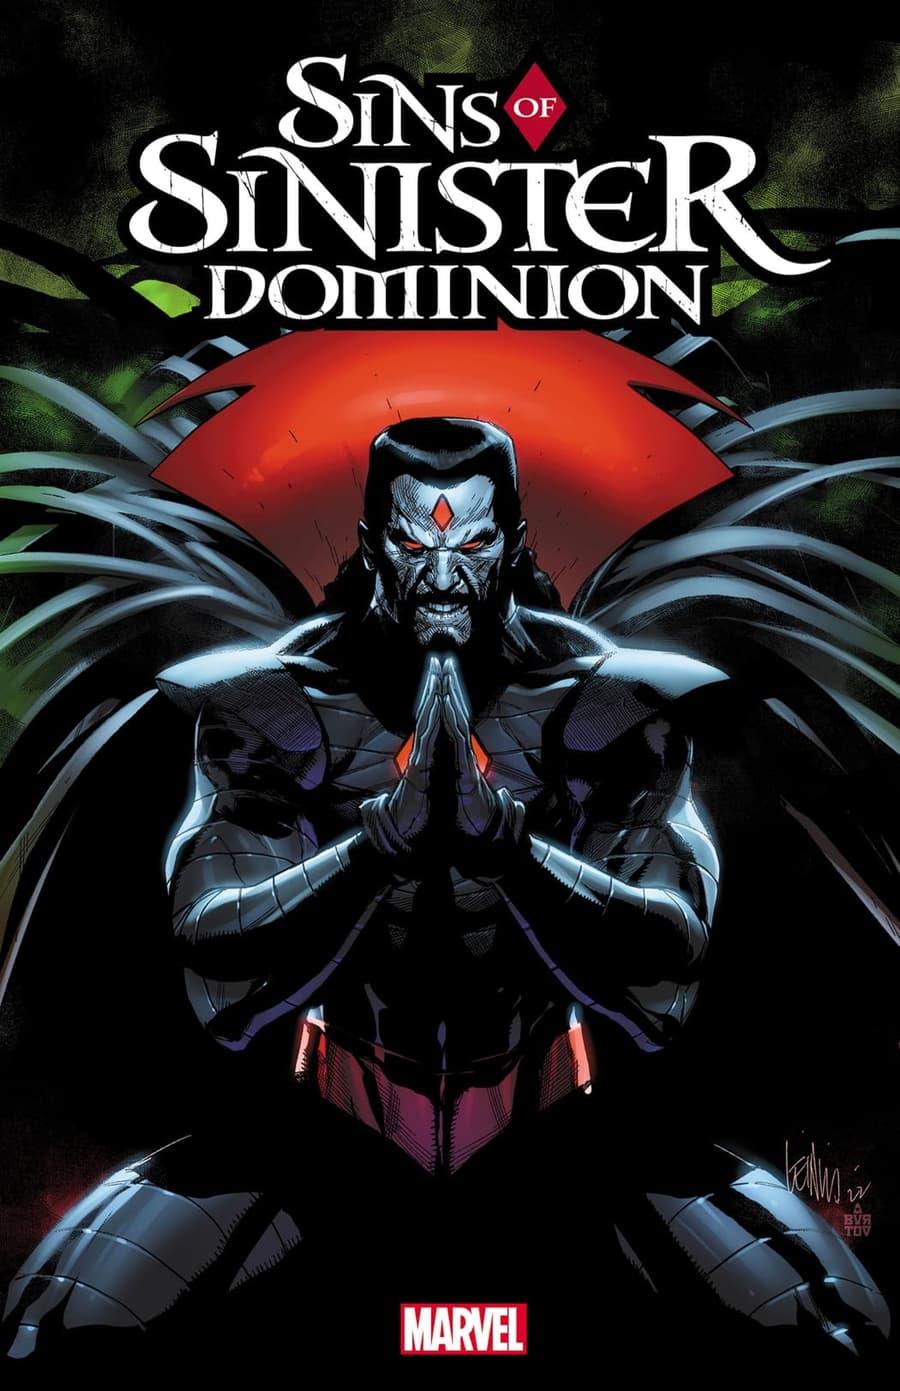 SINS OF SINISTER: DOMINION (2023) #1 cover by Leinil Francis Yu